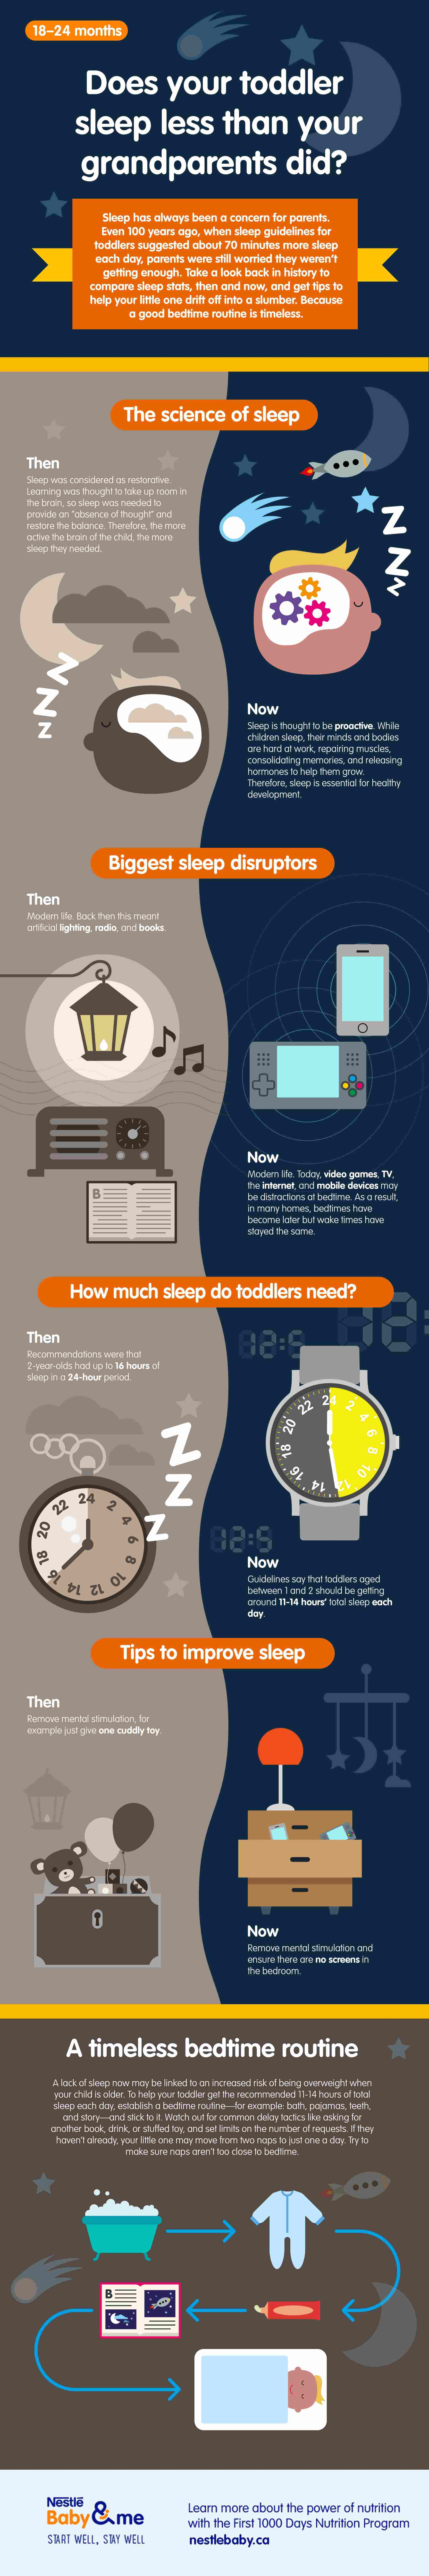 Sleep and healthy growth_02_LEARN_Does your toddler sleep less than your grandparents did_900px